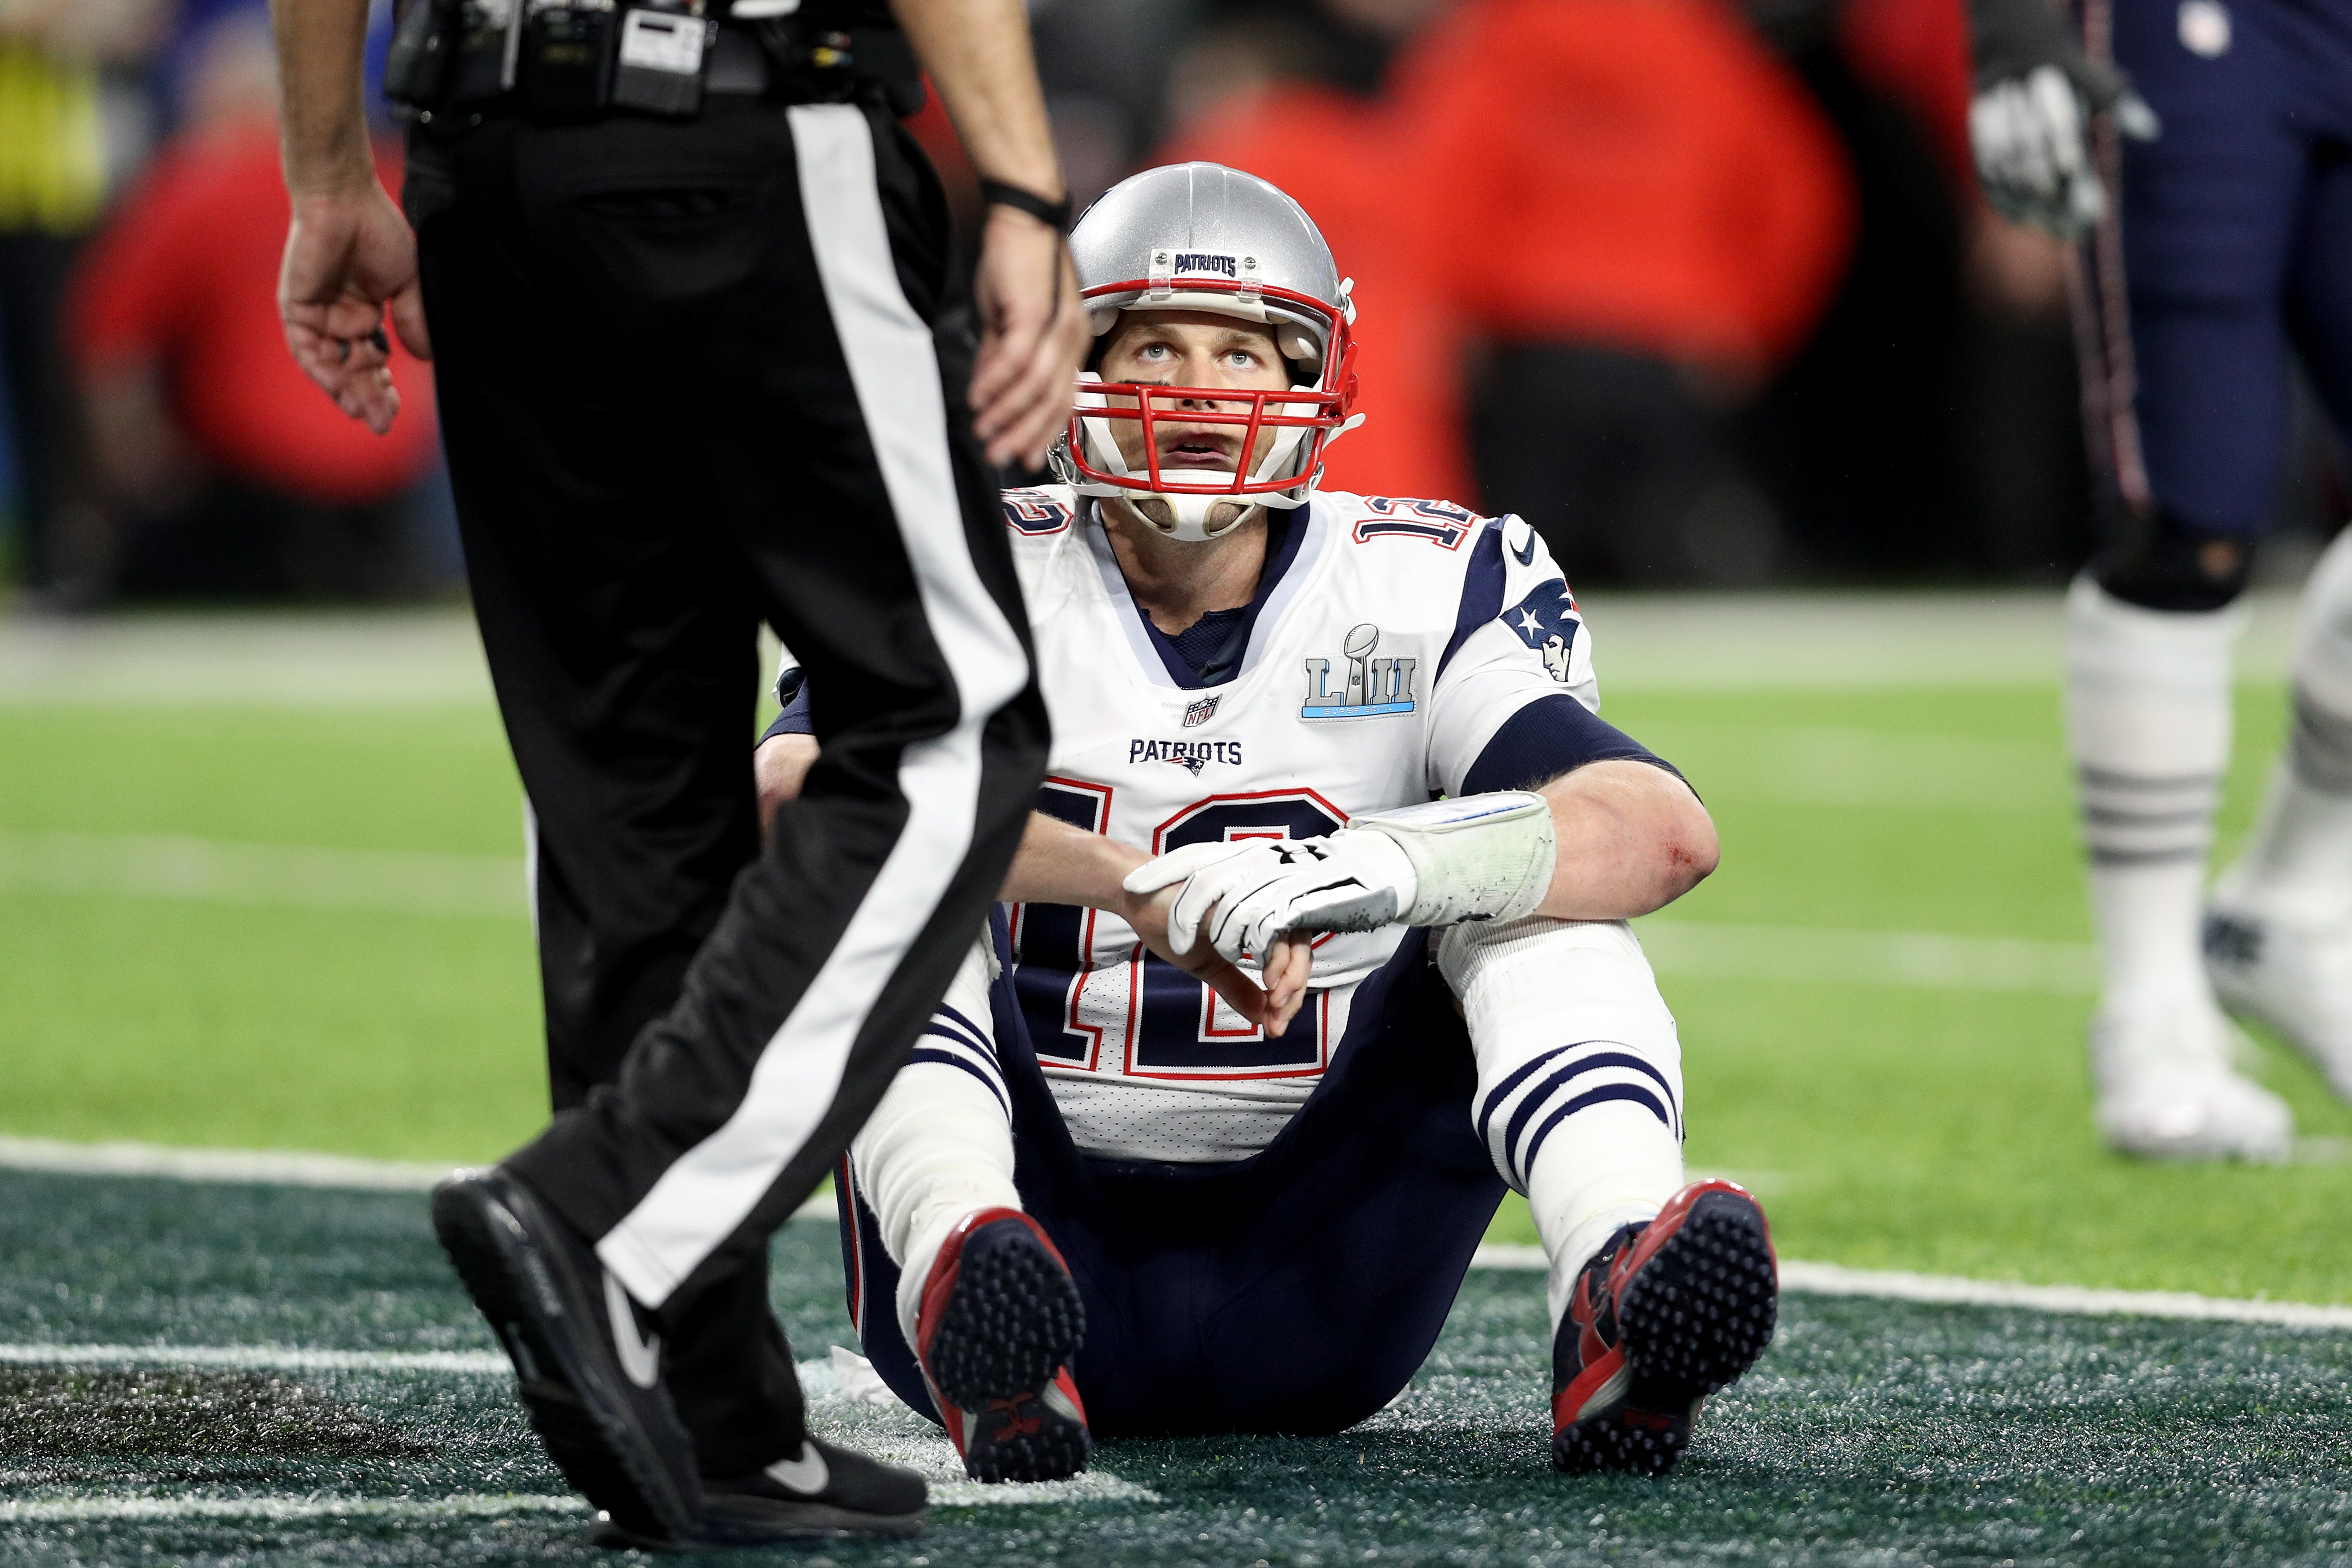 A Downtrodden Tom Brady Shows No Signs of Stopping4738 x 3159